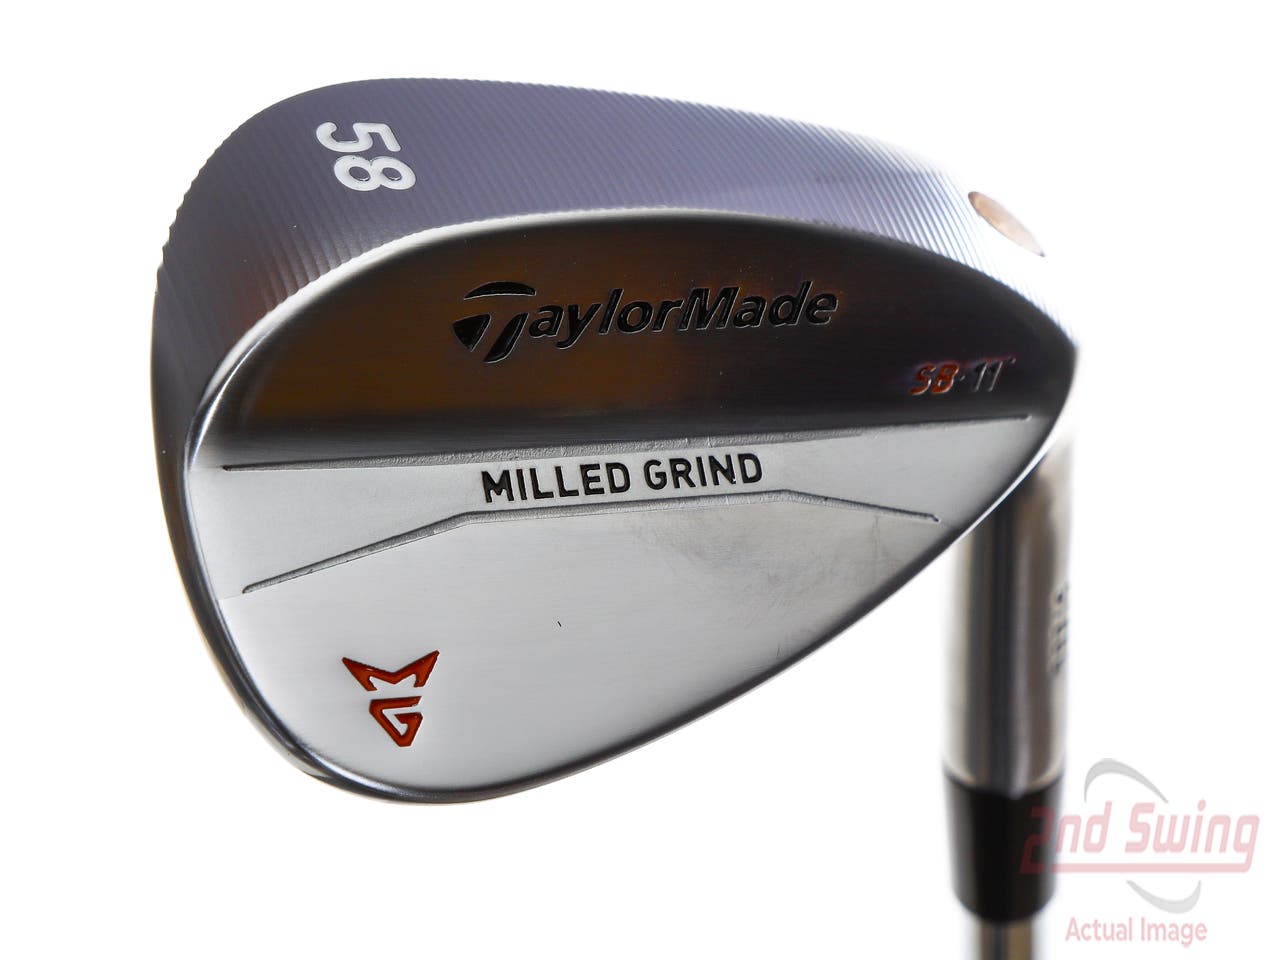 Mint TaylorMade Milled Grind Satin Chrome Wedge Lob LW 58° 11 Deg Bounce True Temper Dynamic Gold Steel Wedge Flex Right Handed 35.0in